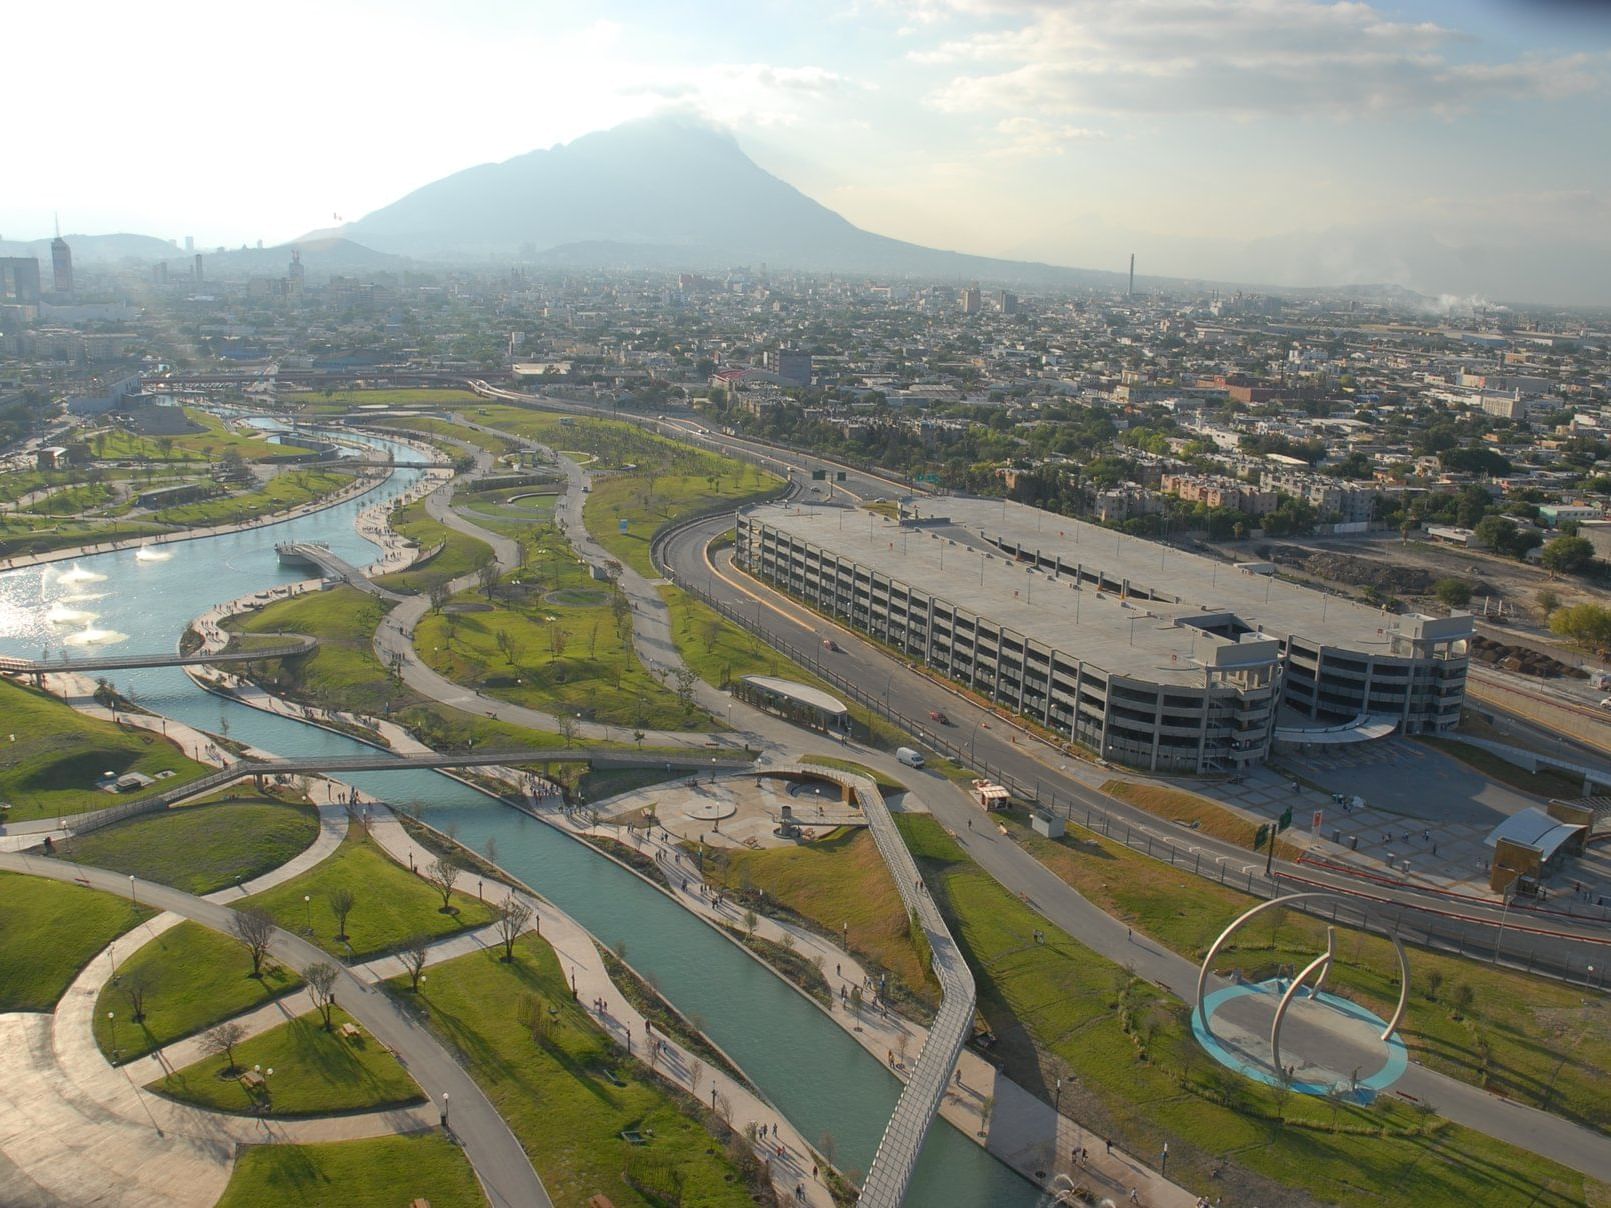 Aerial view of Ride Santa Lucia in the Monterrey city